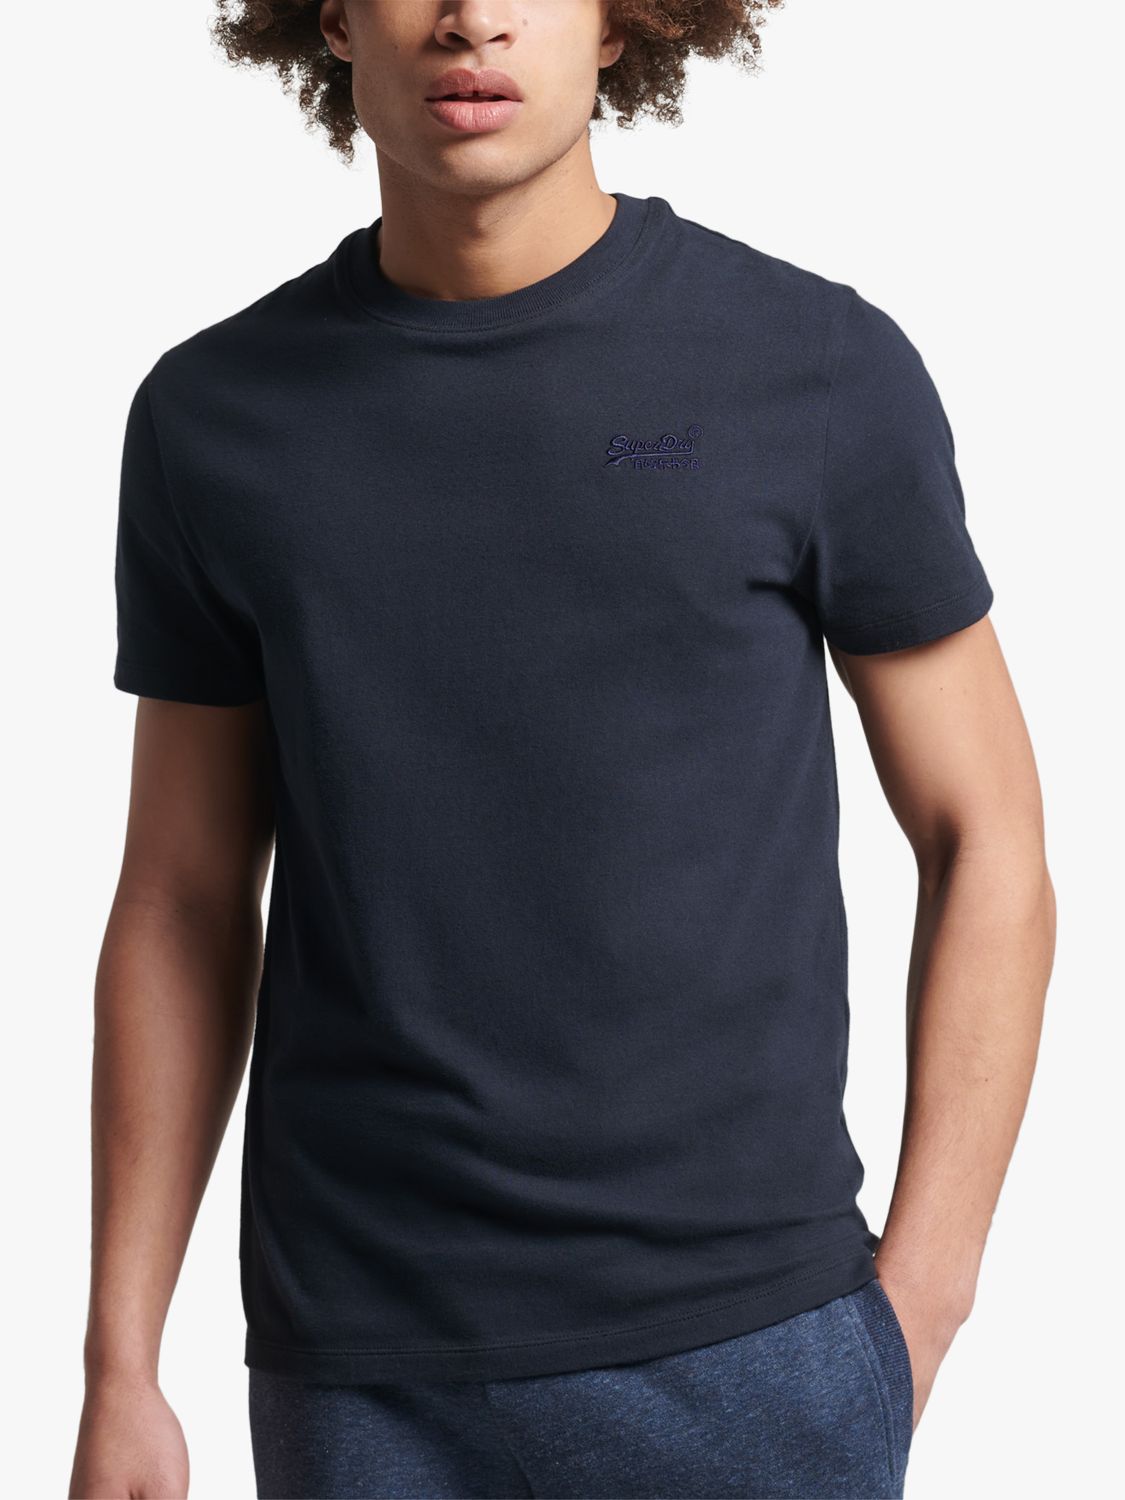 Eclipse & John Lewis Cotton T-Shirt, Logo Embroidered Navy at Organic Superdry Partners Vintage